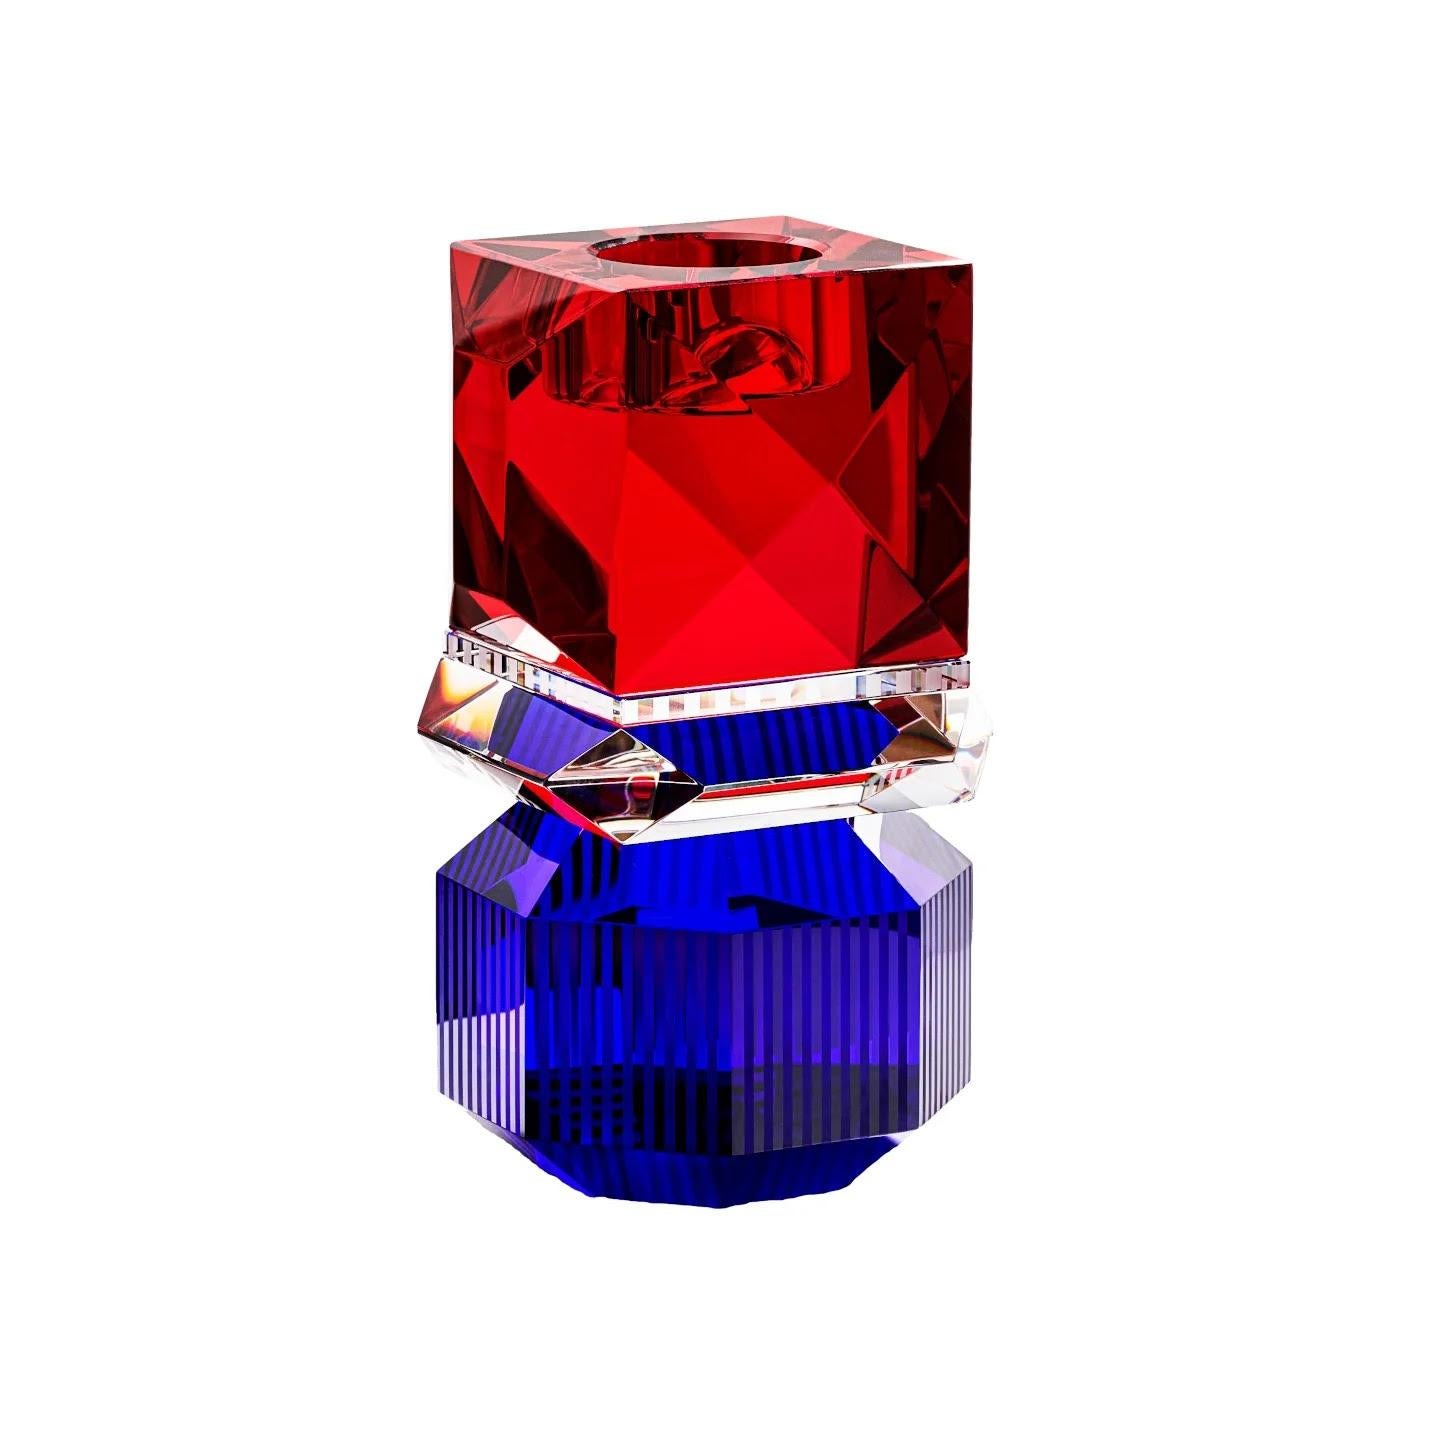 Crystal candleholder available in two colours: Amber/Transparent/Black and Red/Transparent/Cobalt. The balance between the transparency of the crystal and the glow of the candles creates a visual harmony that evokes a sense of calm and well-being.